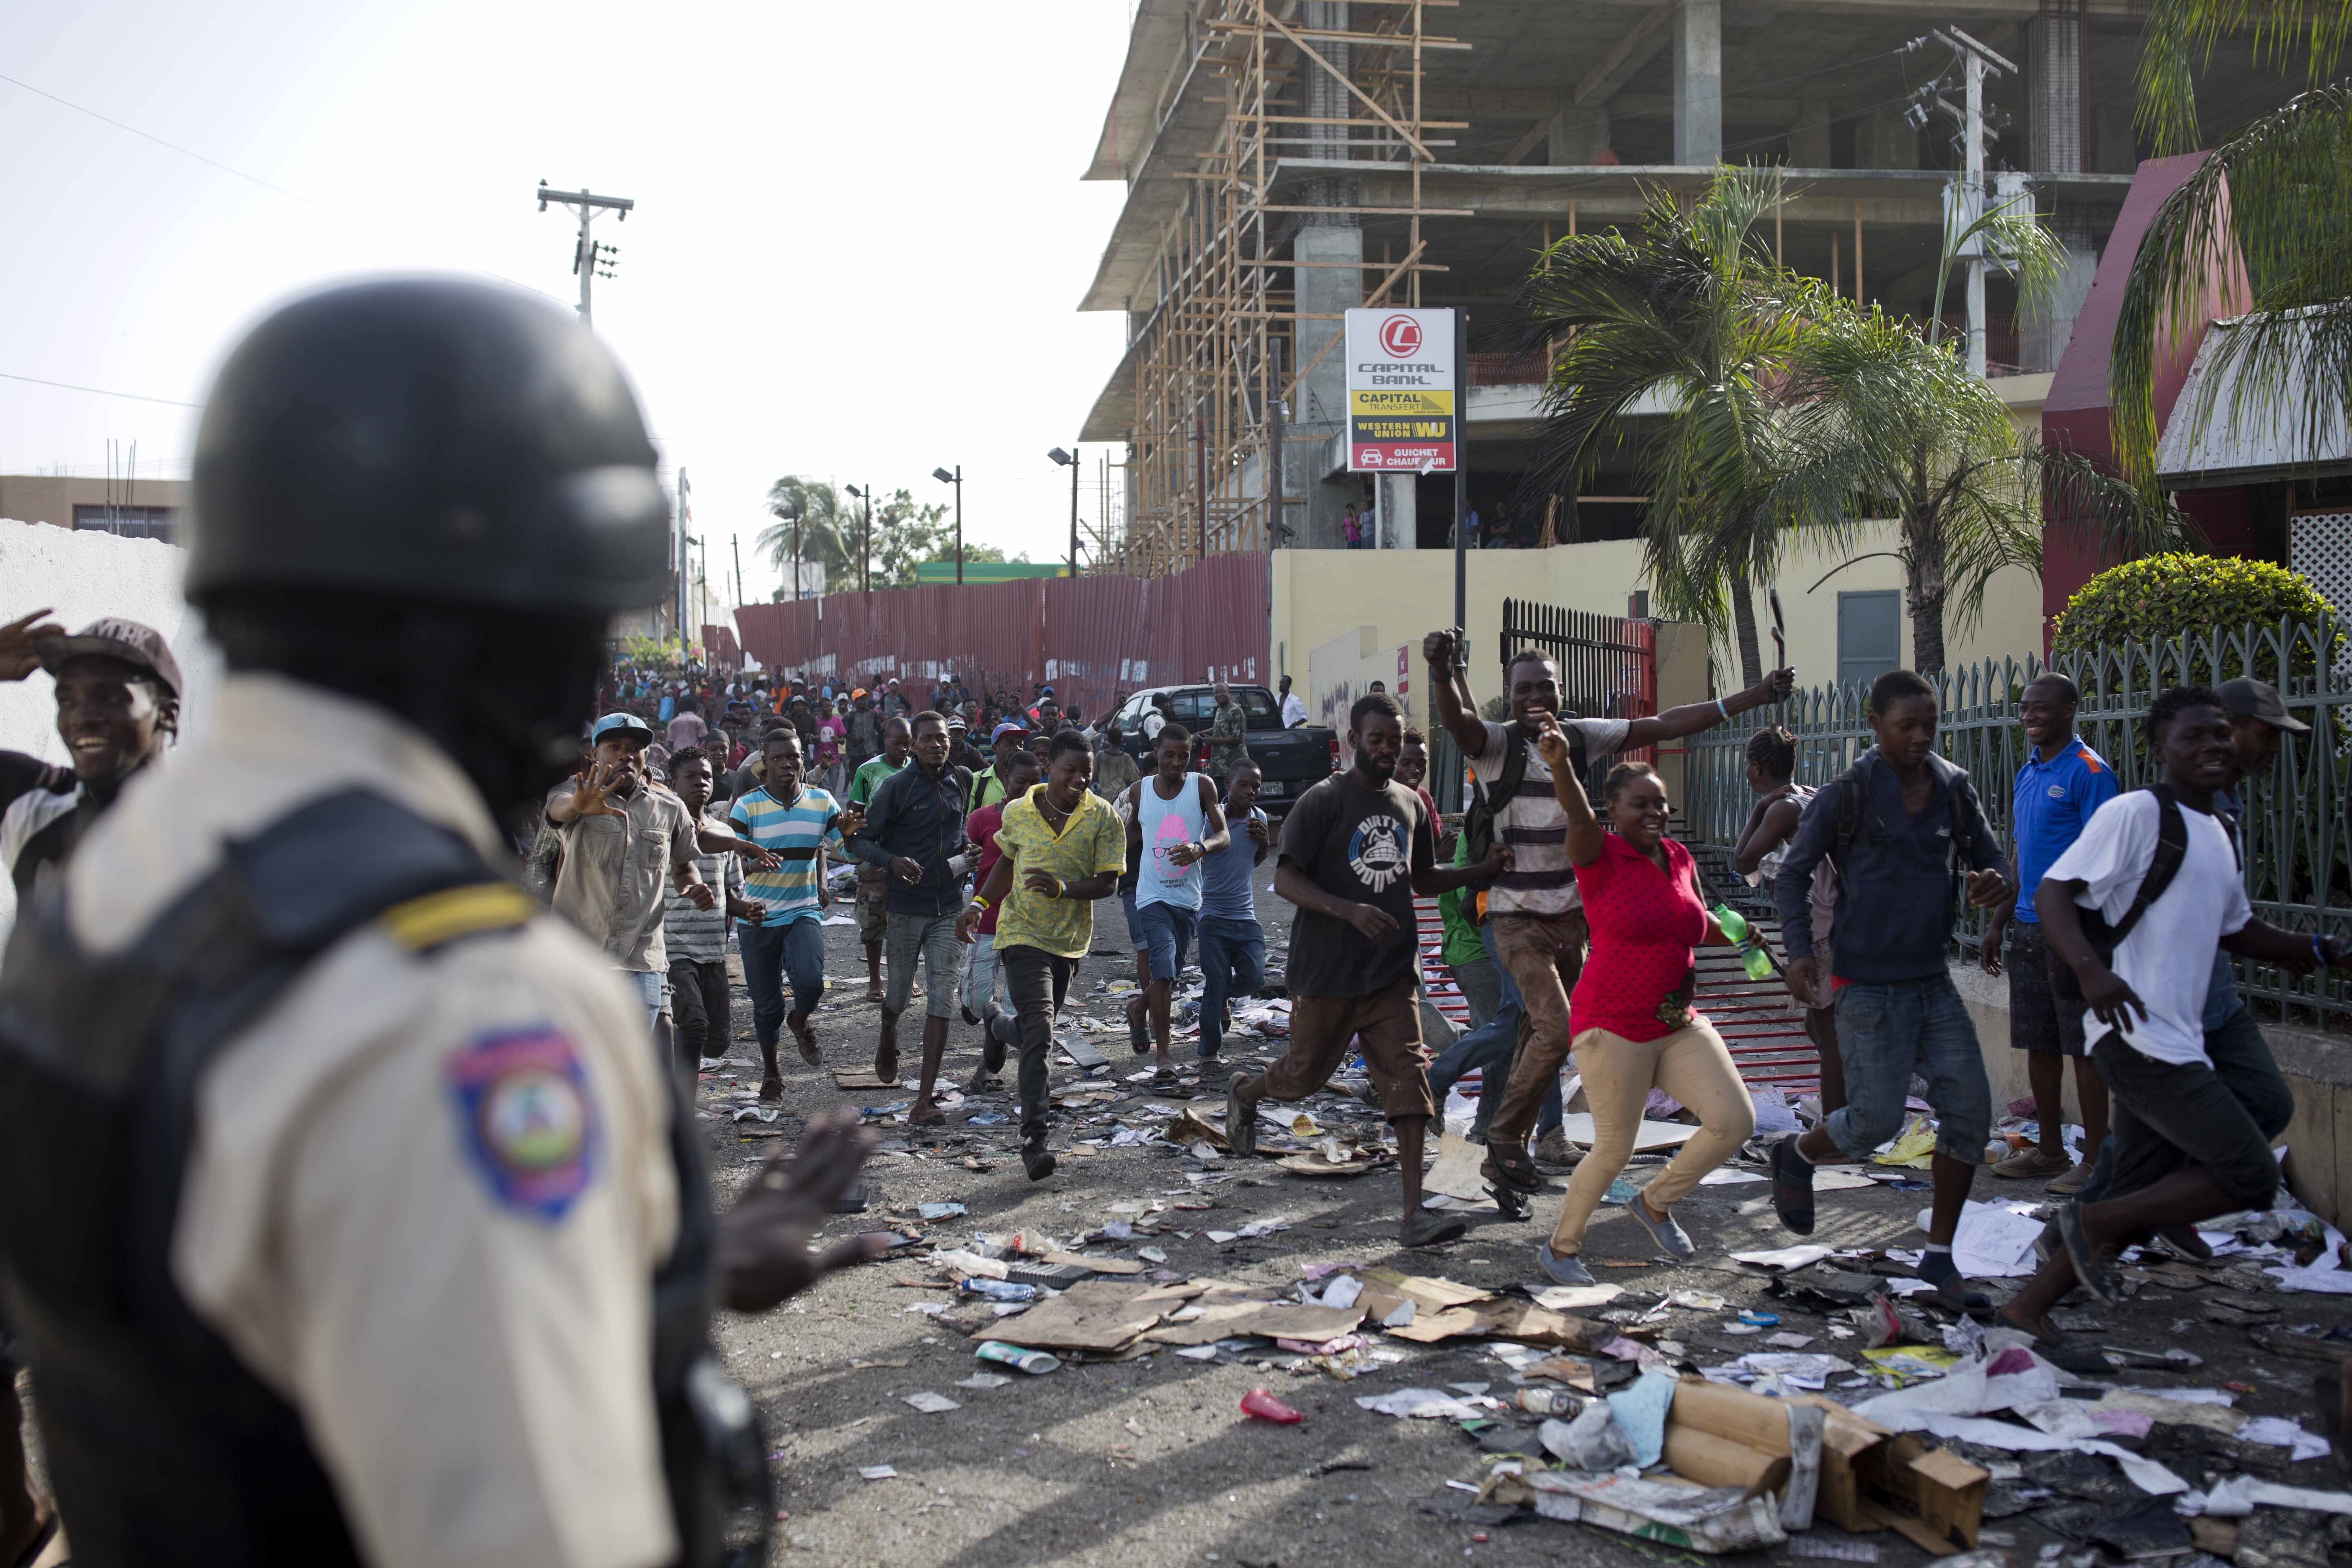 A crowd enters the Delimart supermarket complex, which had been burned during two days of protests in Port-au-Prince